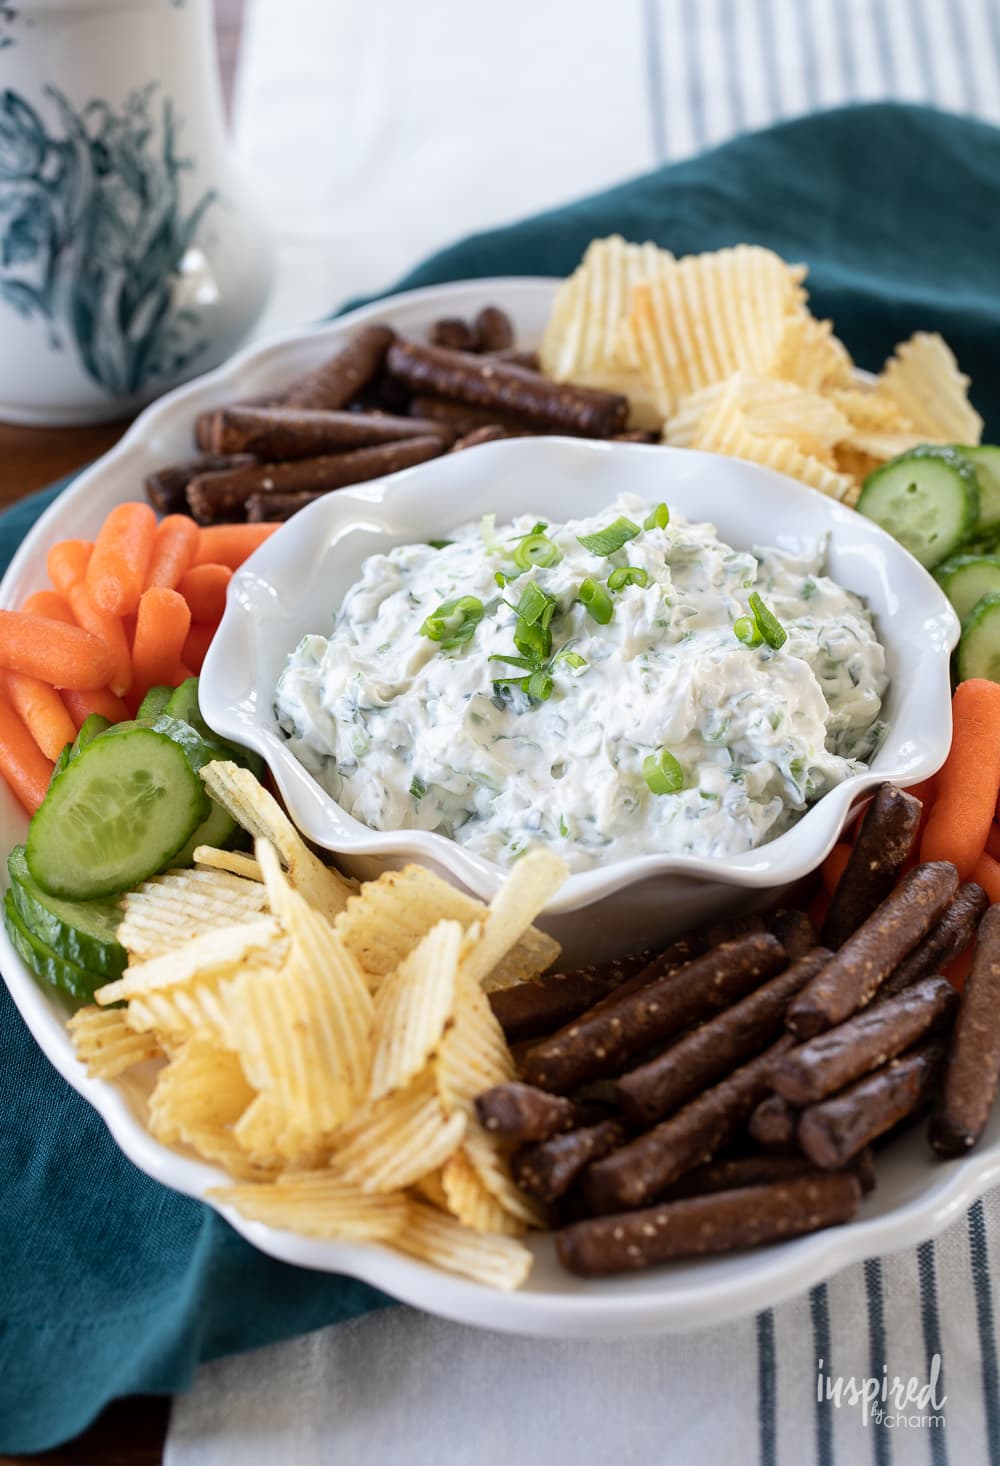 green onion dip in a bowl on a plate with chips and vegetables.